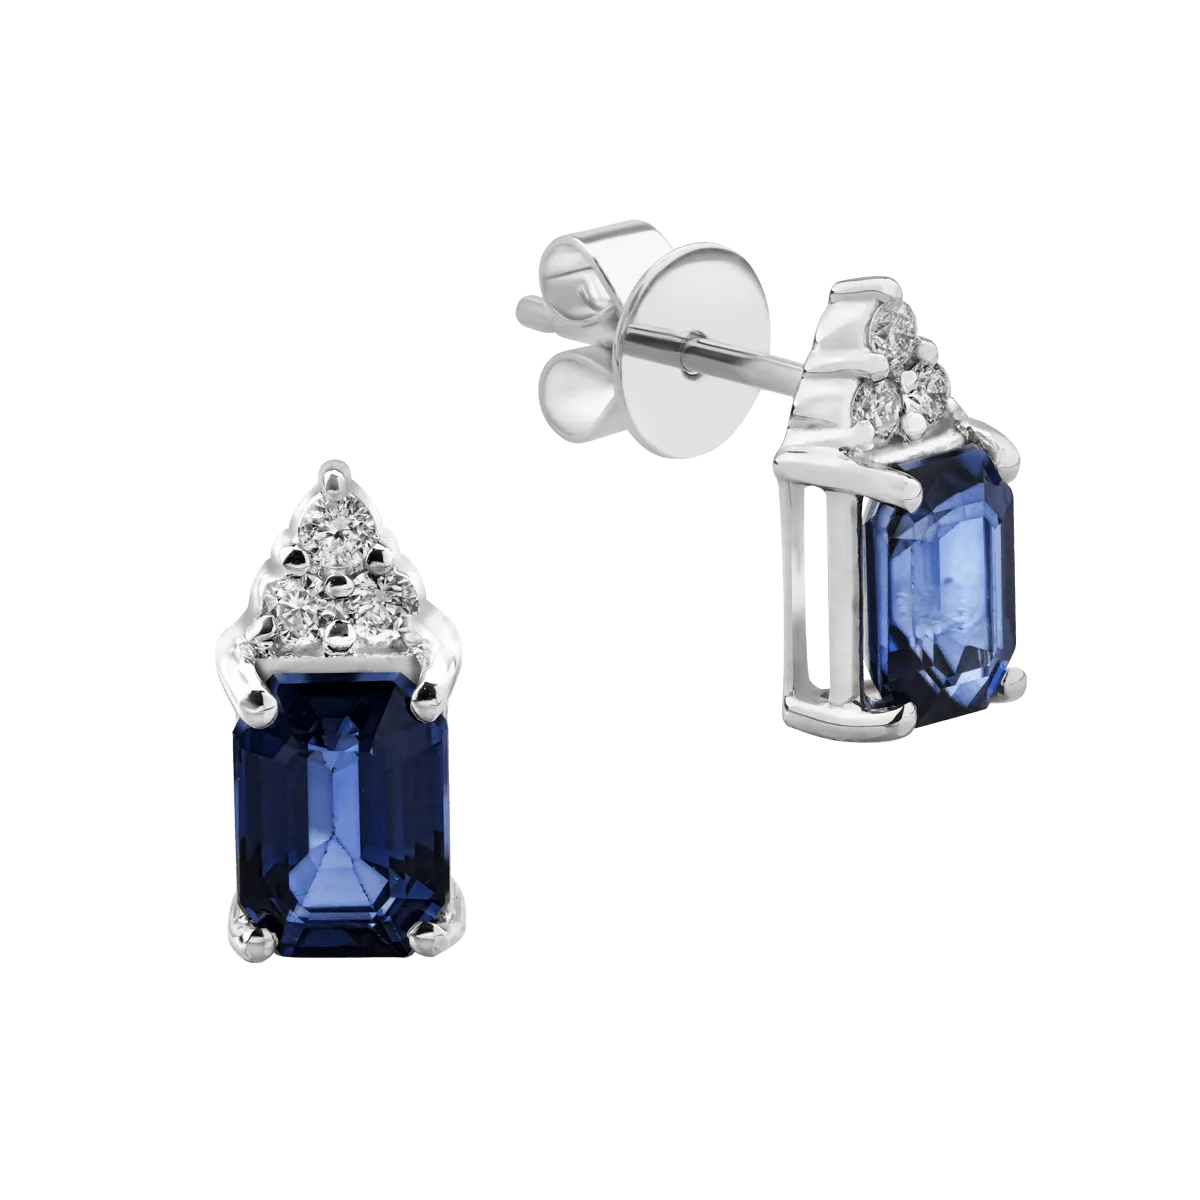 14K white gold earrings with 2.07ct treated sapphires and 0.13ct diamonds